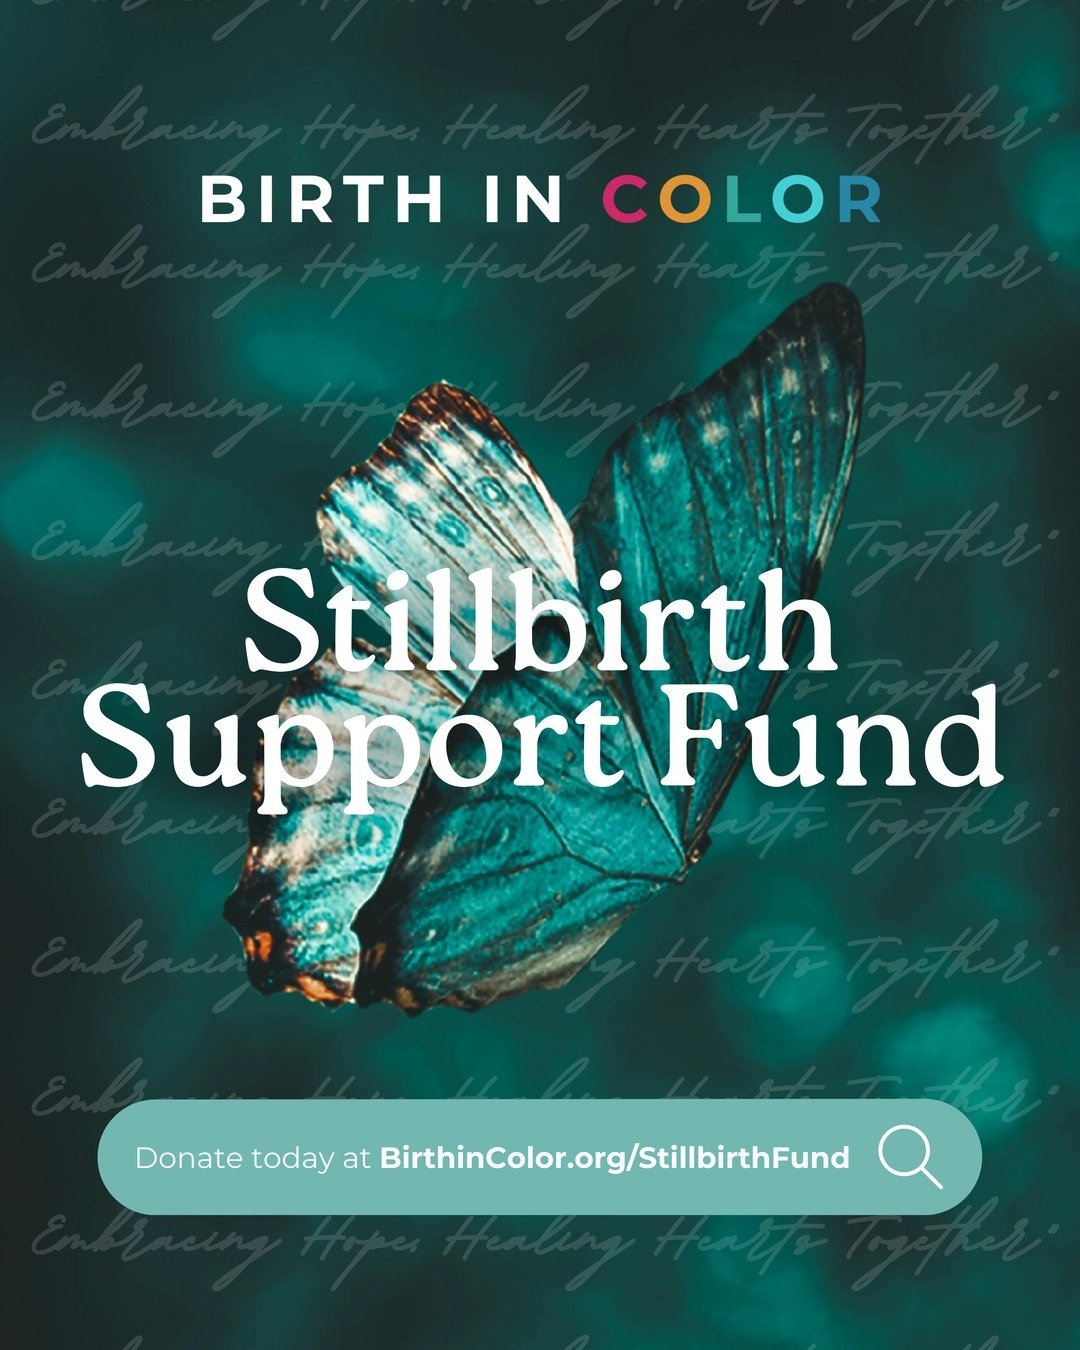 ☁️ Losing a baby is one of the most painful experiences a family can go through. According to the National Institute of Child Health and Human Development (NICHD), about 1 in every 160 pregnancies ends in stillbirth.

To further support our community